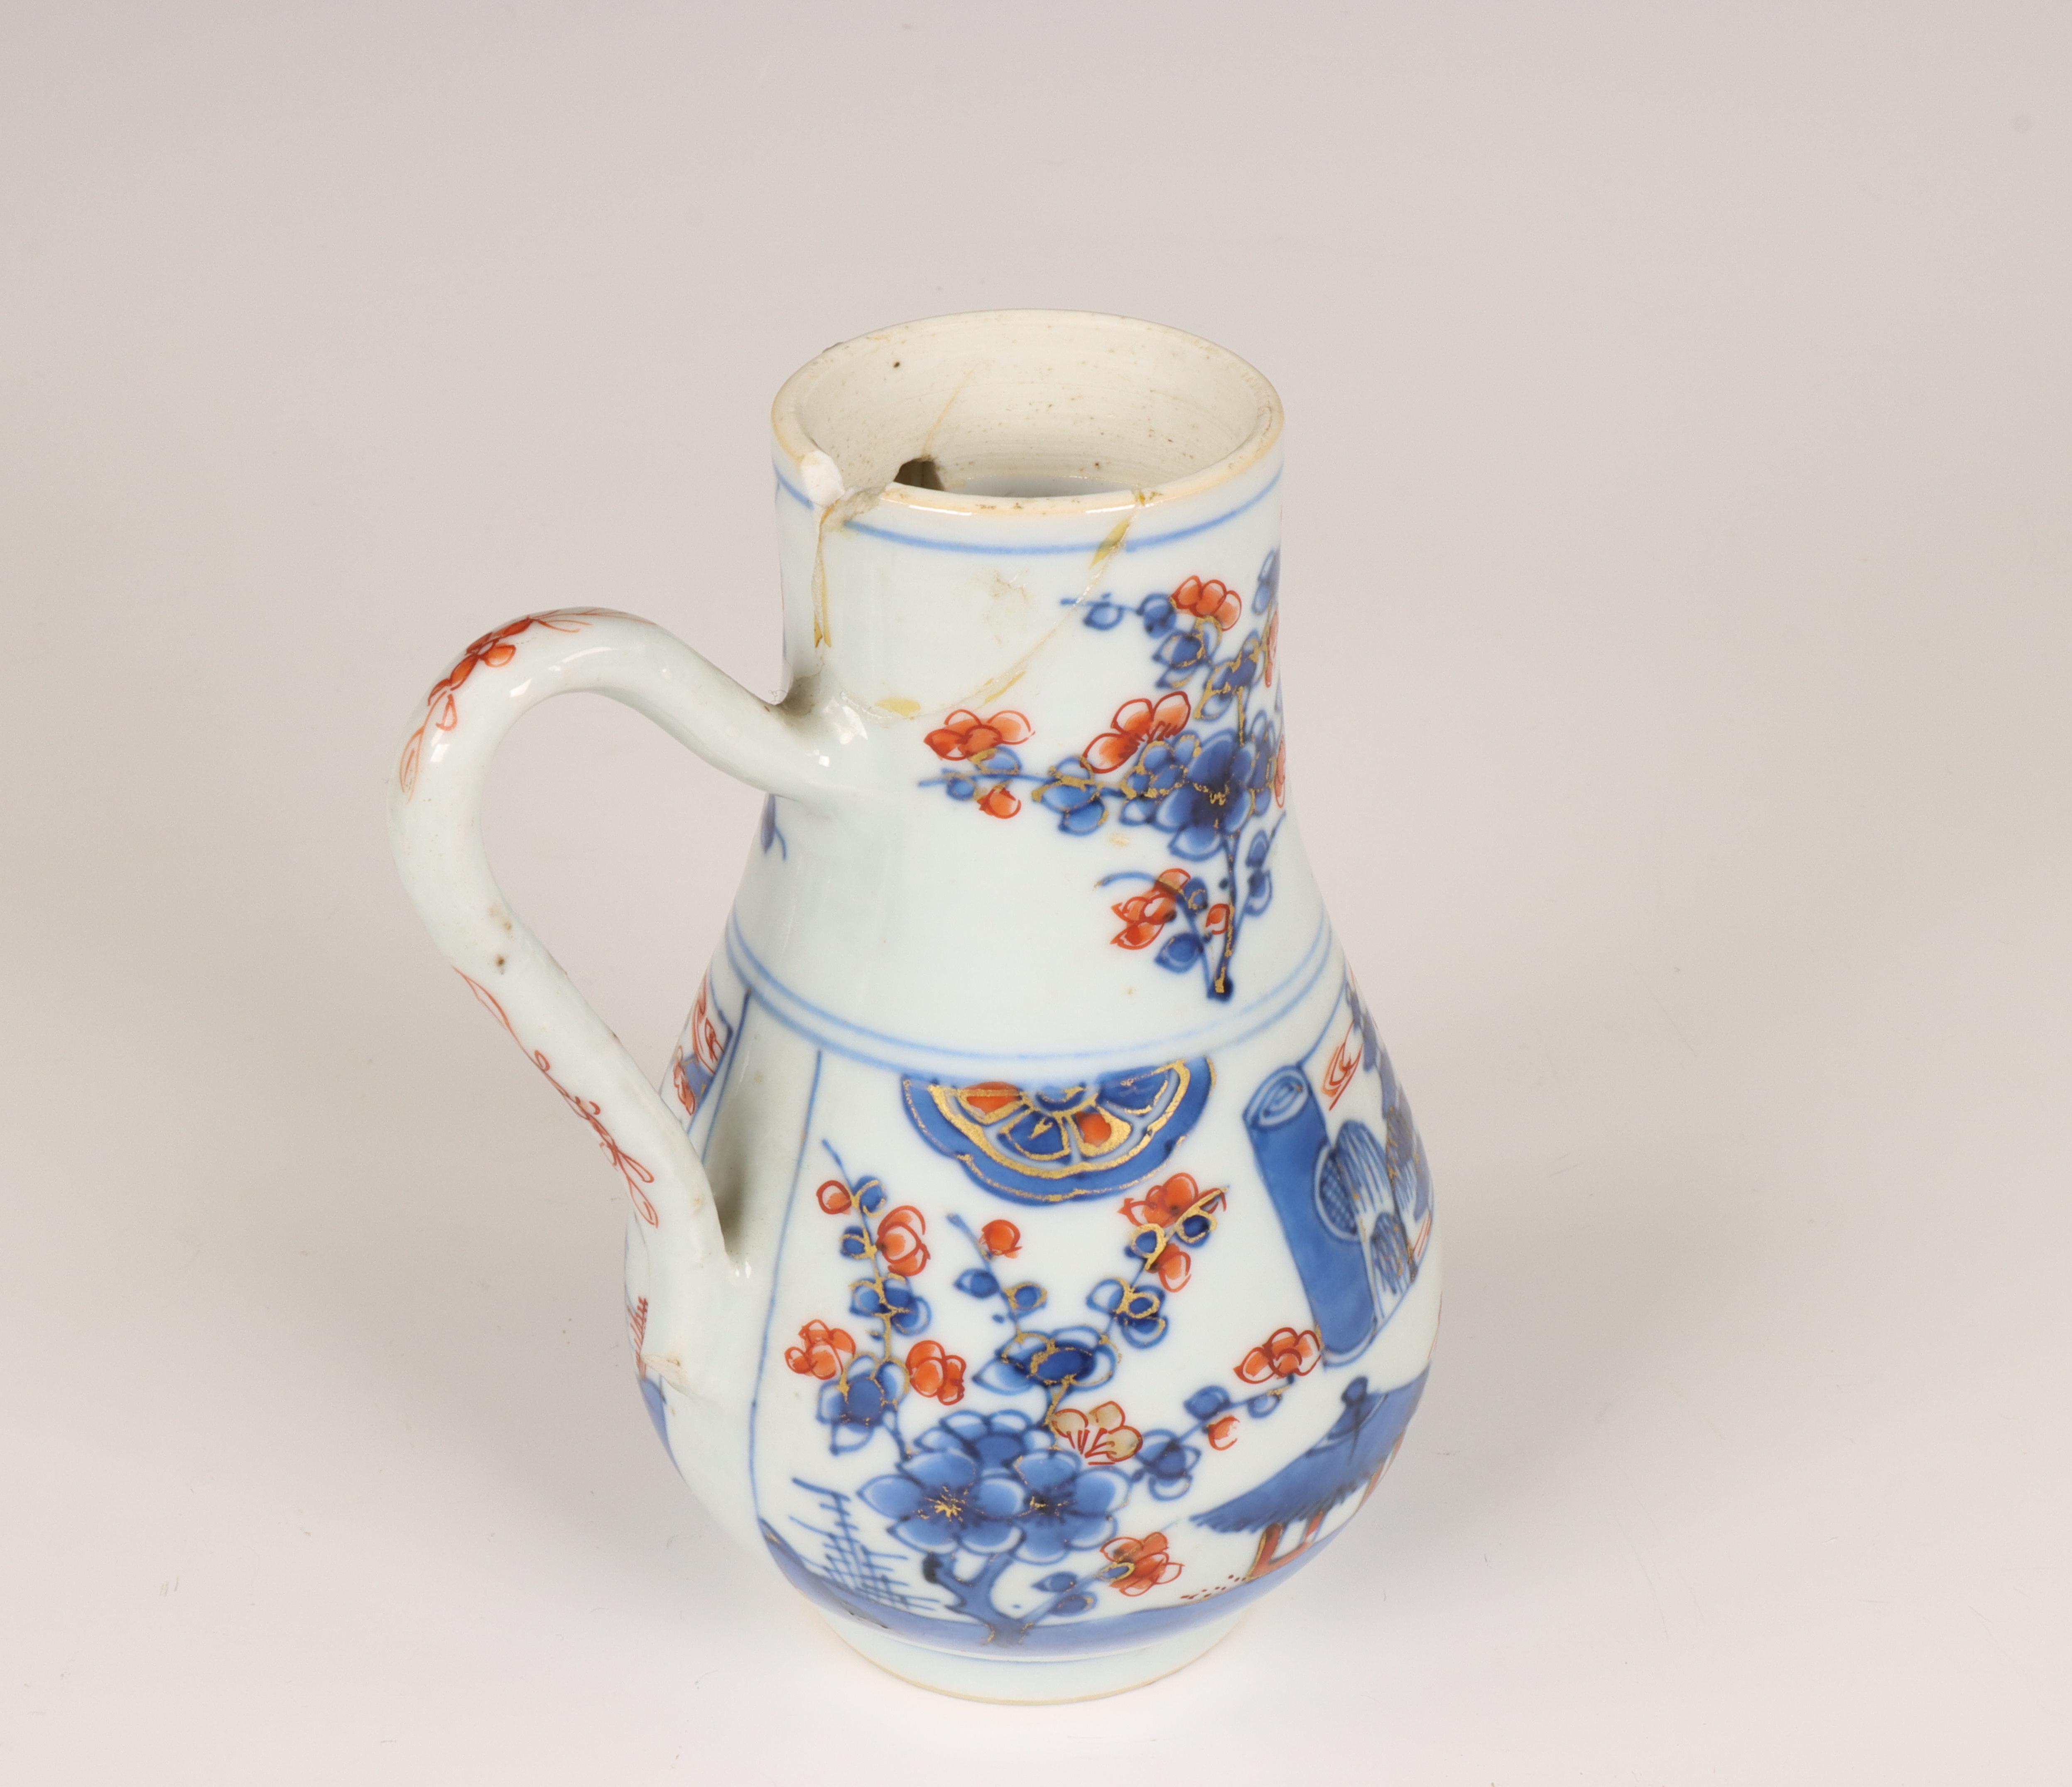 China and Japan, small collection of Imari porcelain, 18th century, - Image 2 of 3